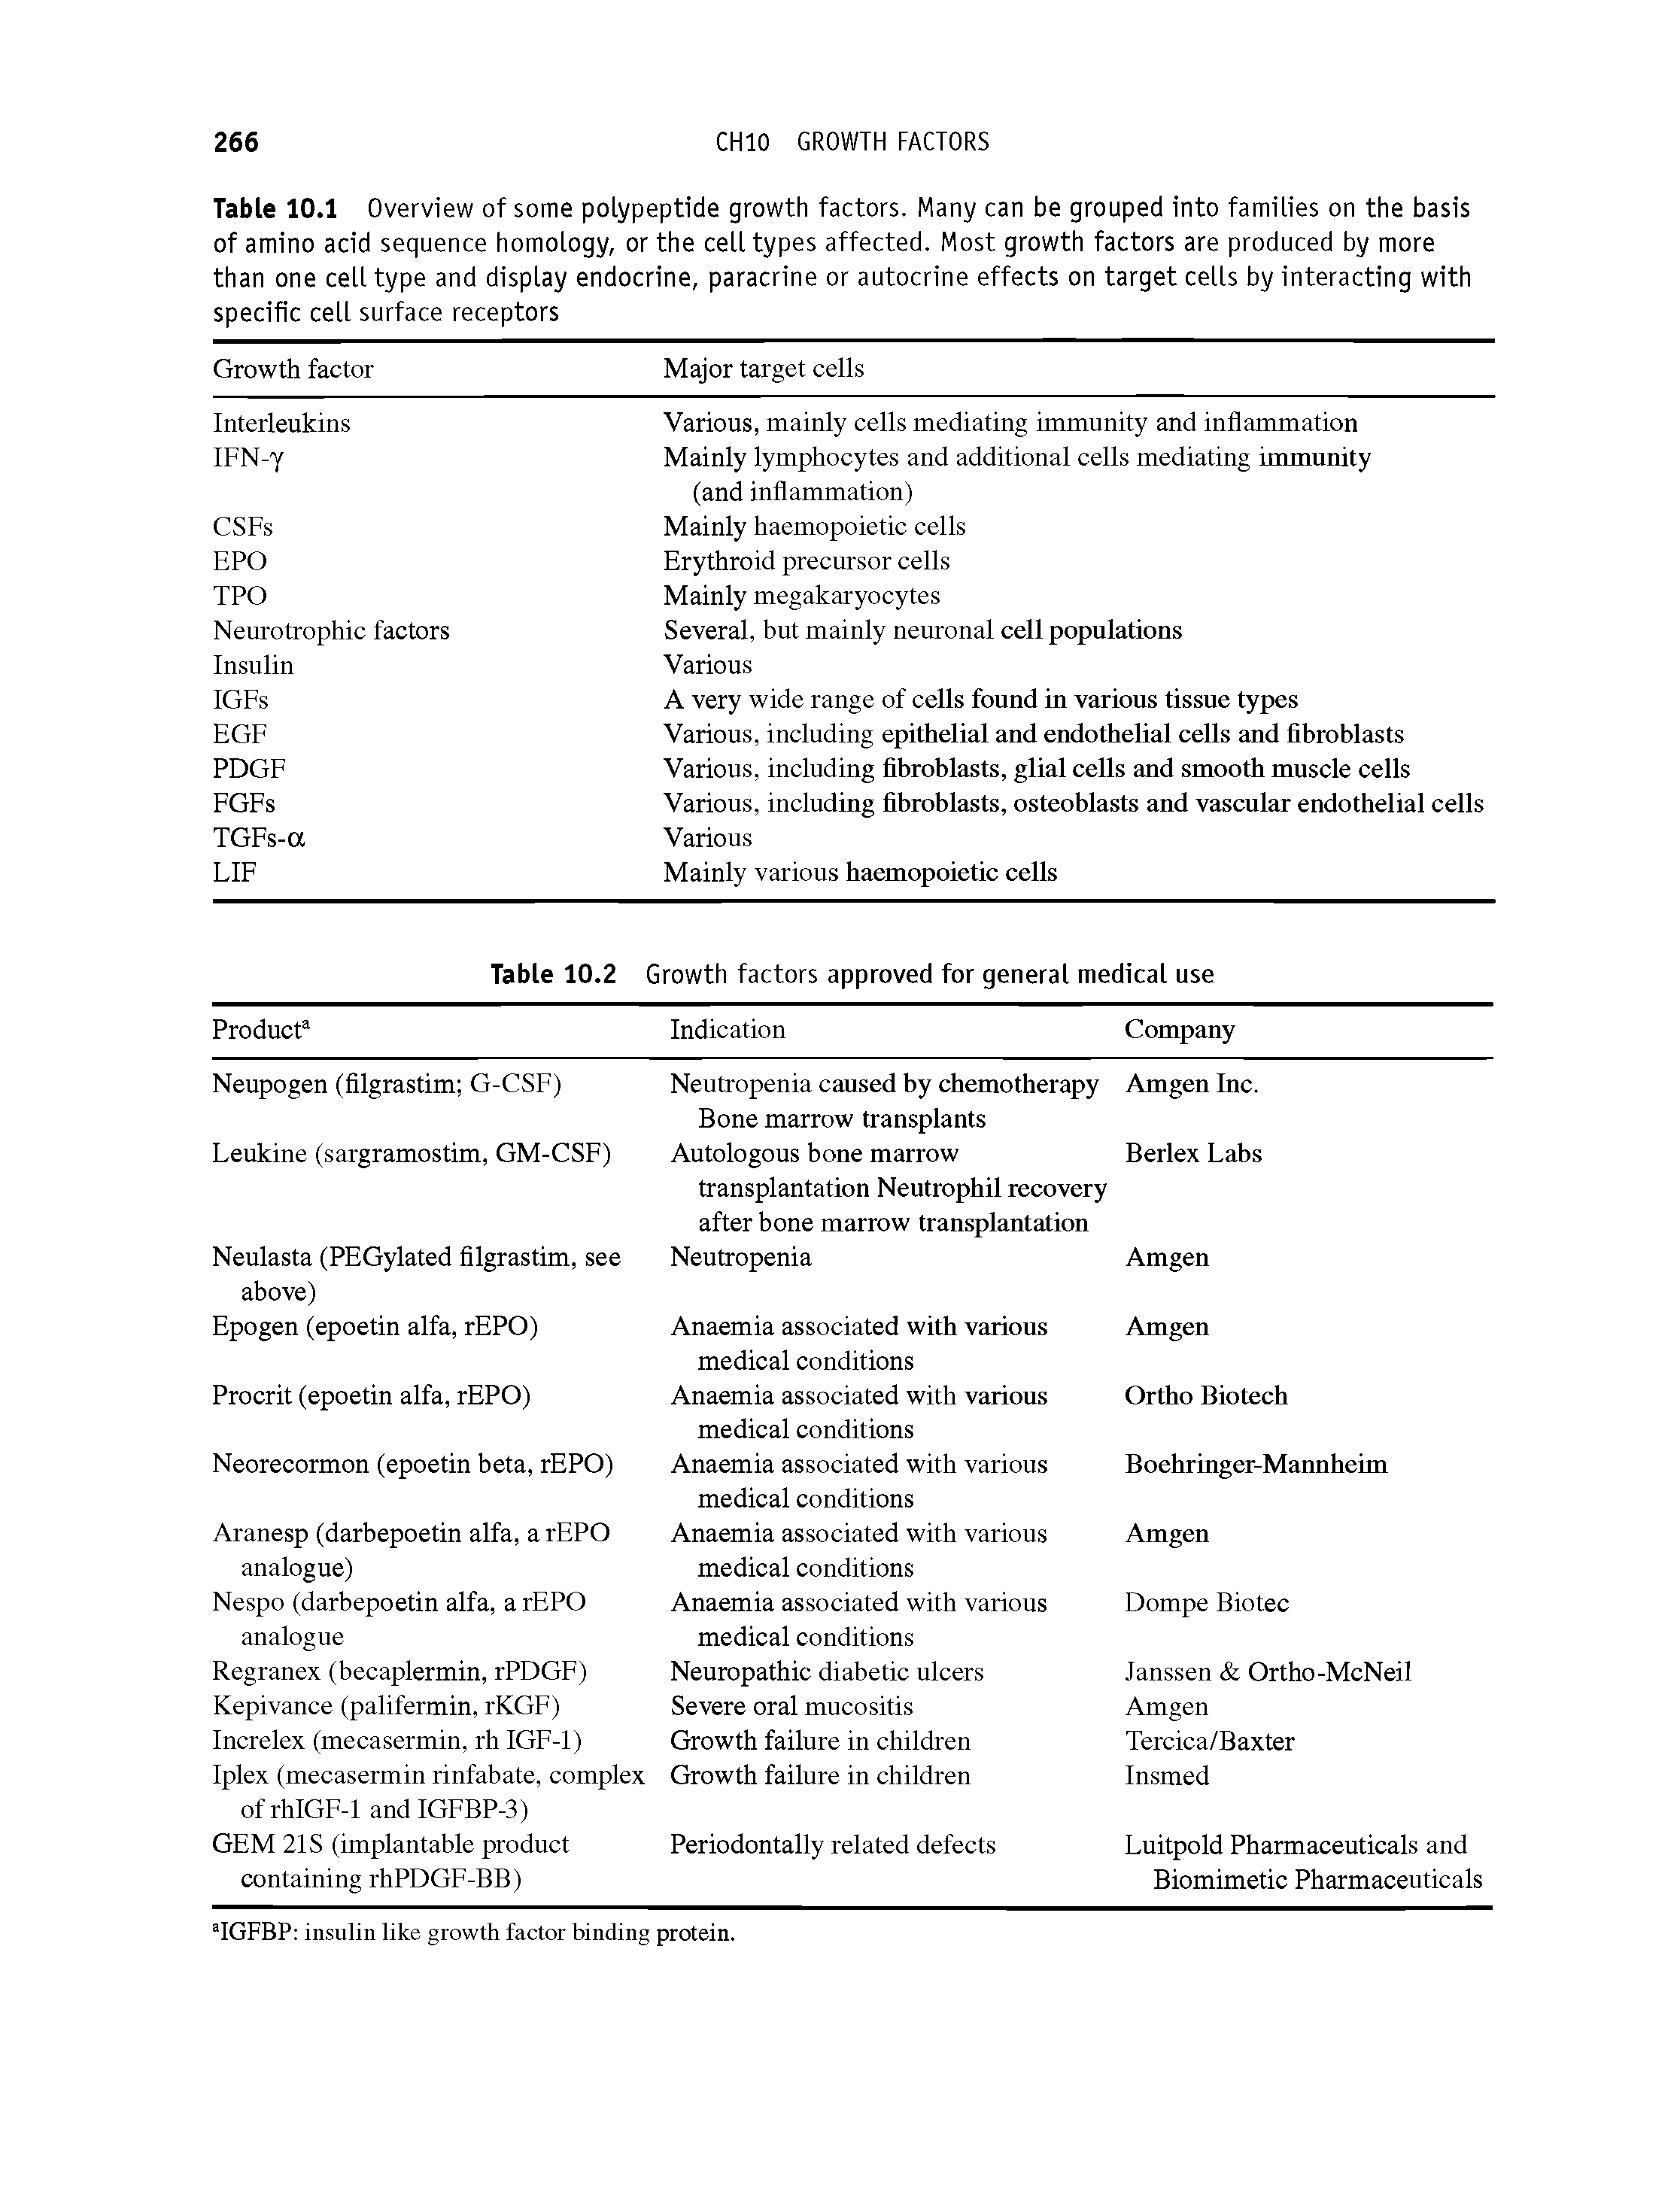 Table 10.1 Overview of some polypeptide growth factors. Many can be grouped into families on the basis of amino acid sequence homology, or the cell types affected. Most growth factors are produced by more than one cell type and display endocrine, paracrine or autocrine effects on target cells by interacting with specific cell surface receptors...